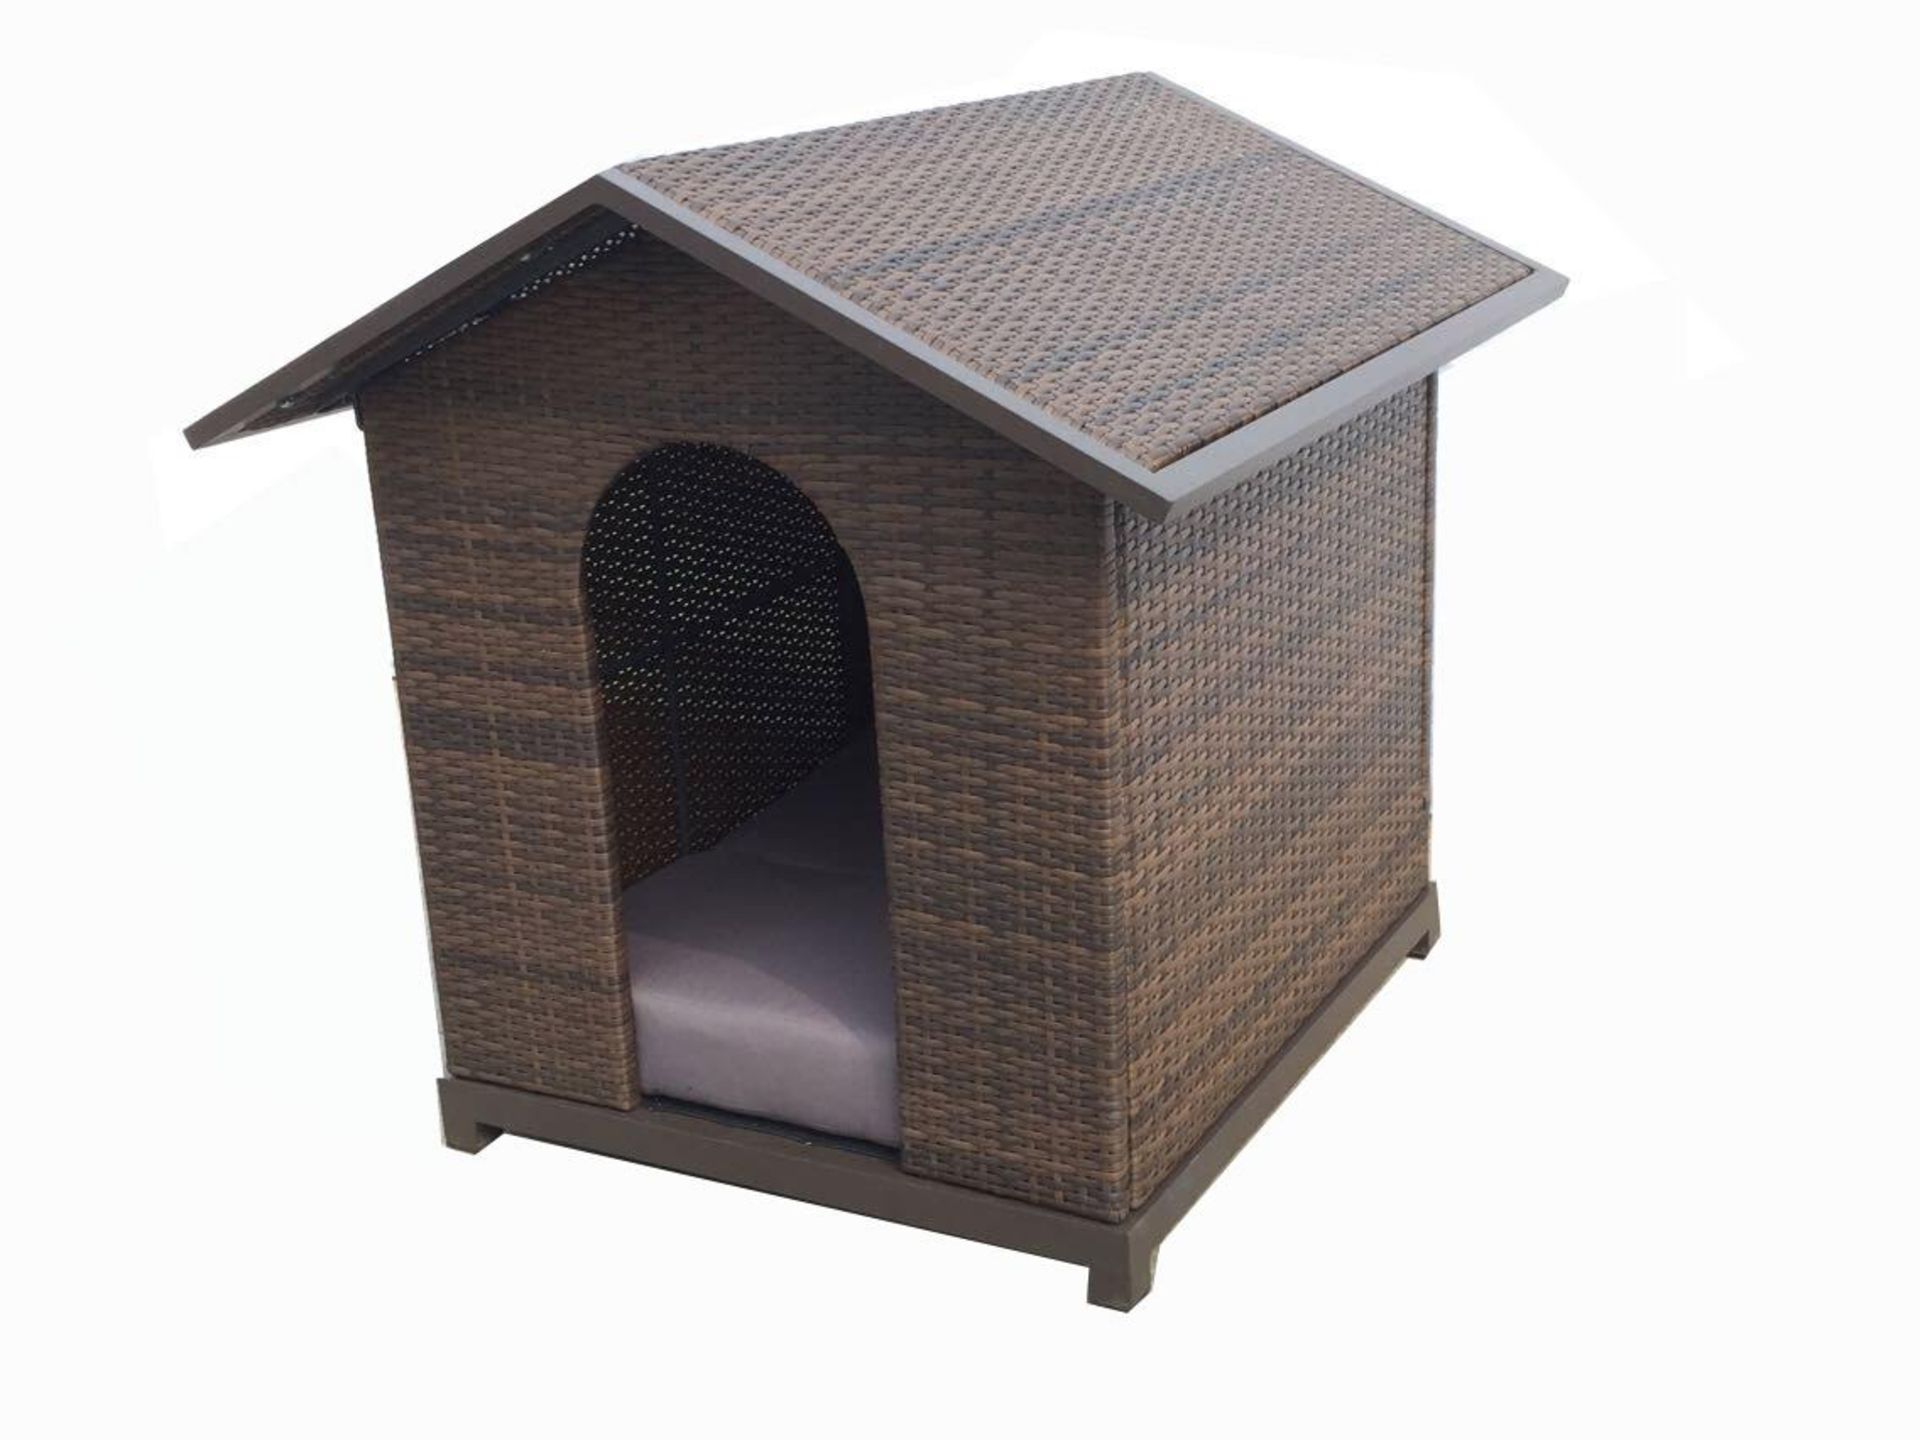 Rattan Dog Kennel available in Brown.